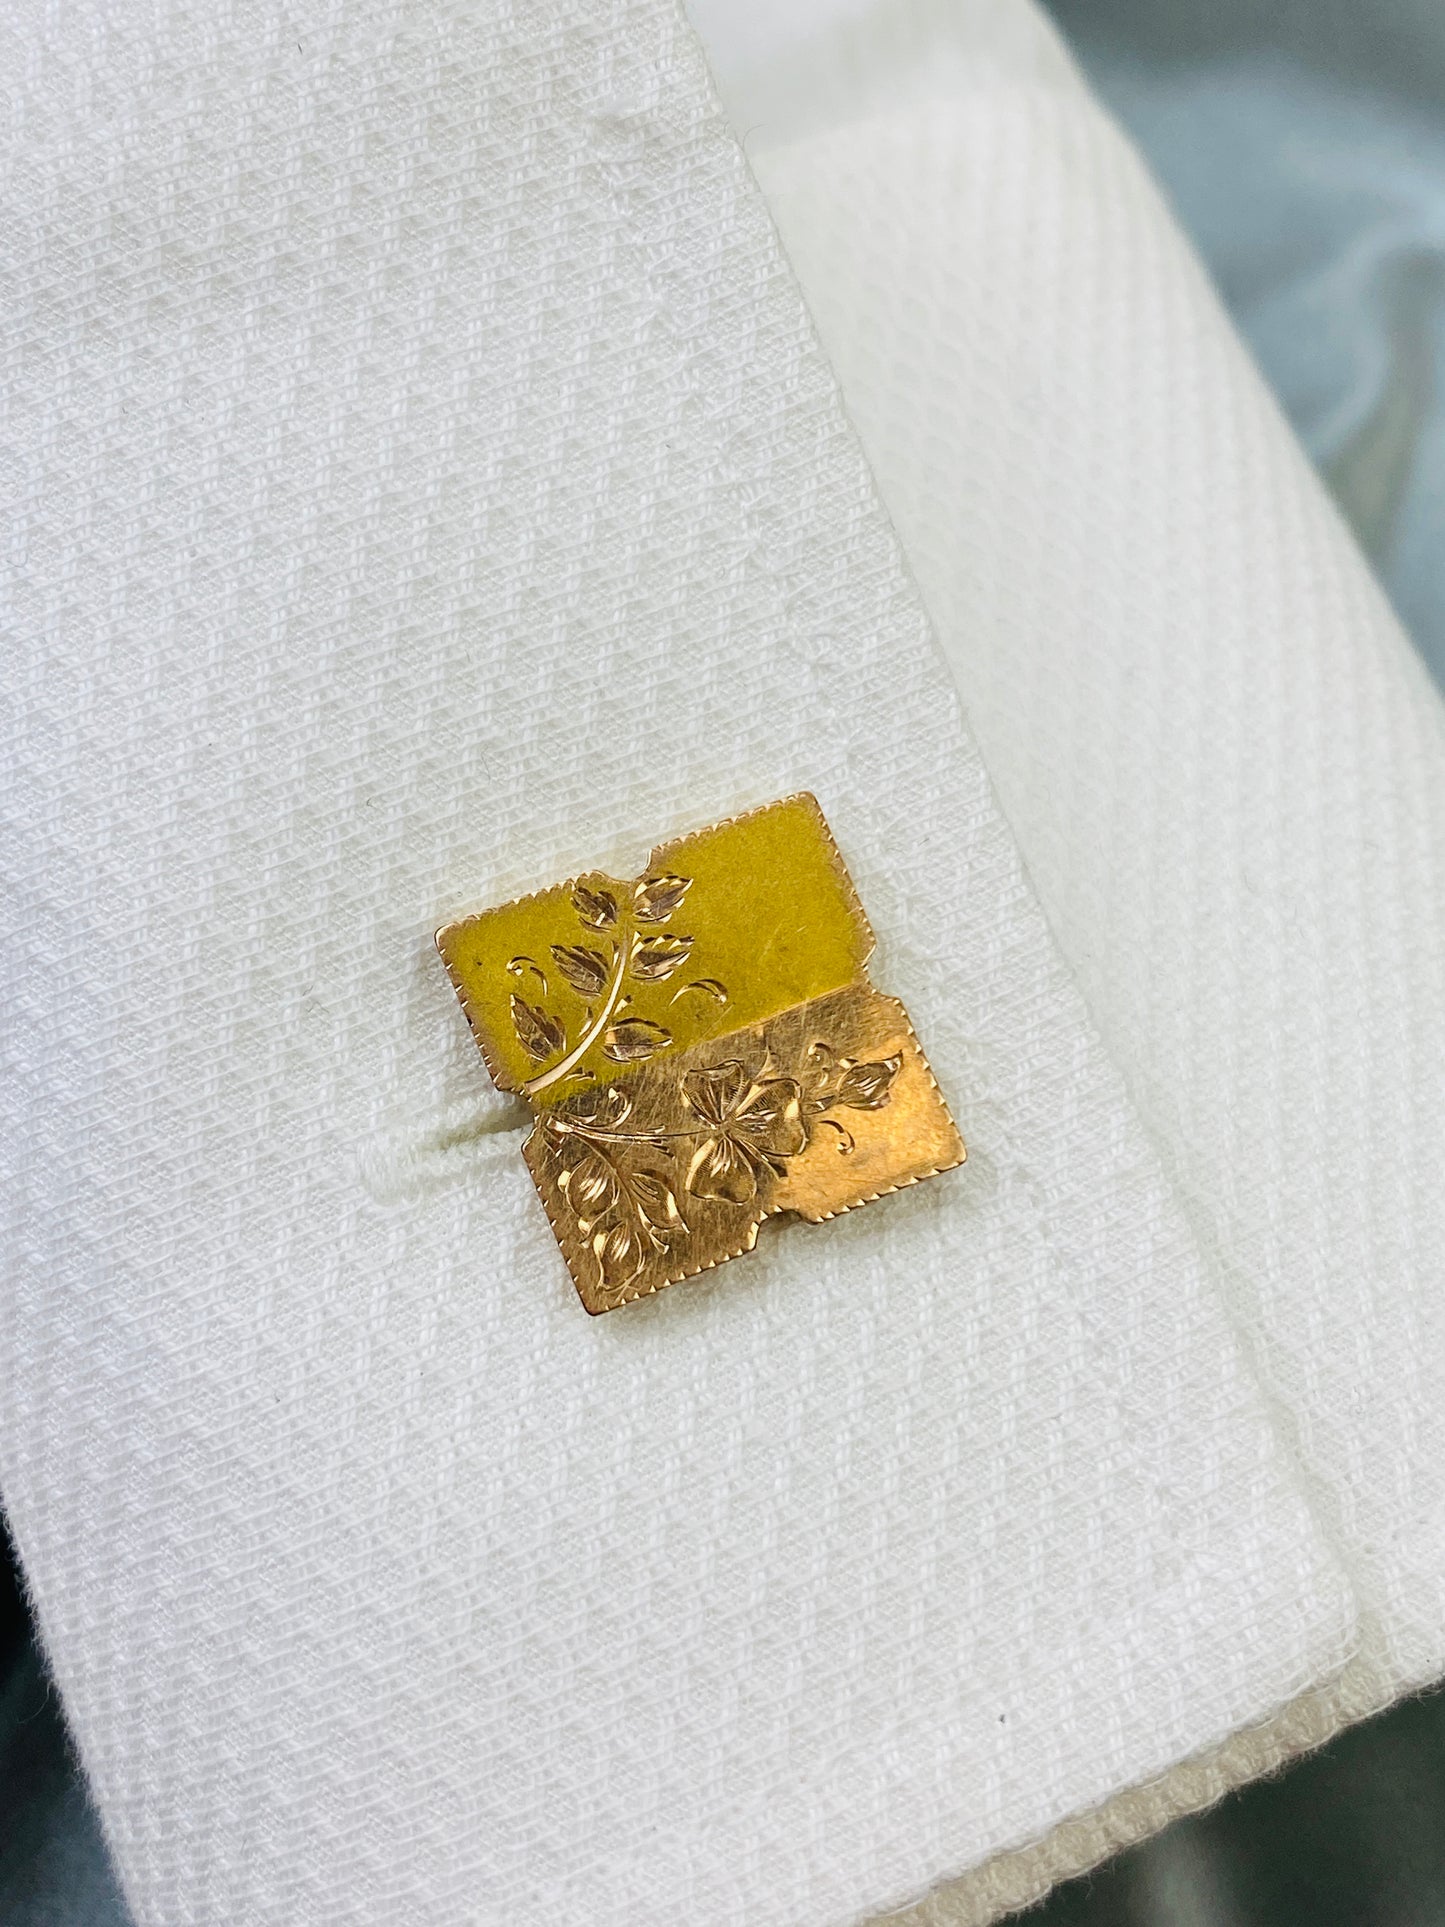 Vintage Victorian Men's Square Cufflinks, Two-Tone Gold with Floral Engraving